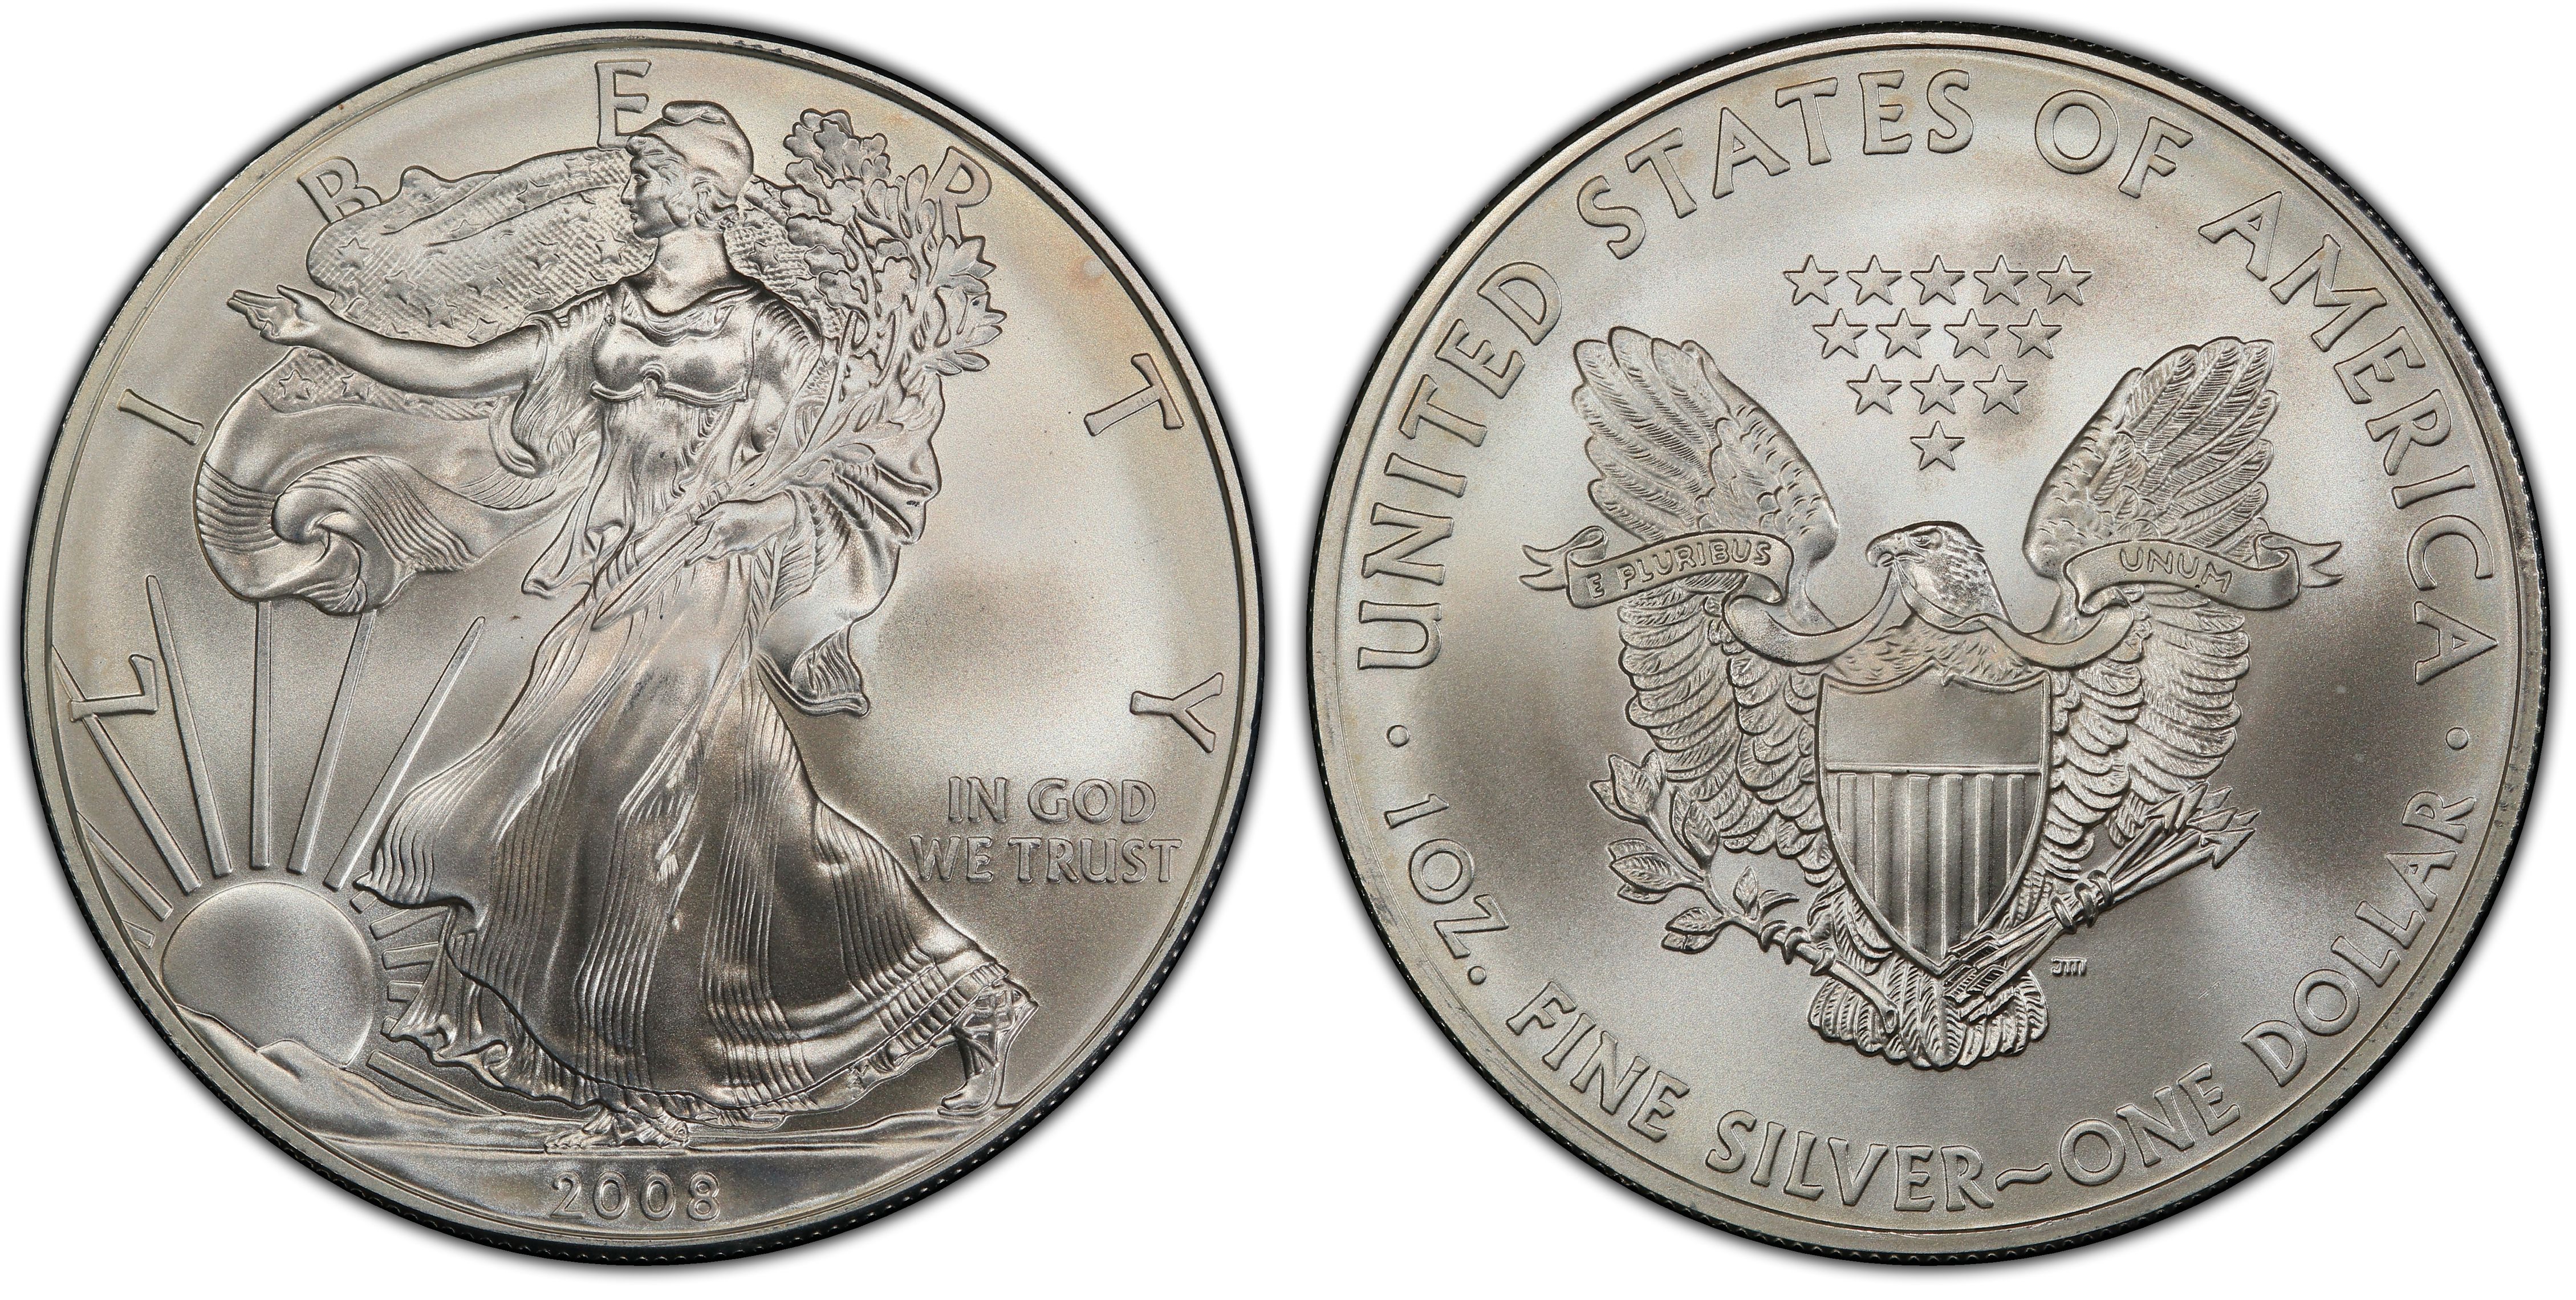 Details about   2008 BU American Silver Eagle Dollar Uncirculated ASE US Mint Bullion Coin 